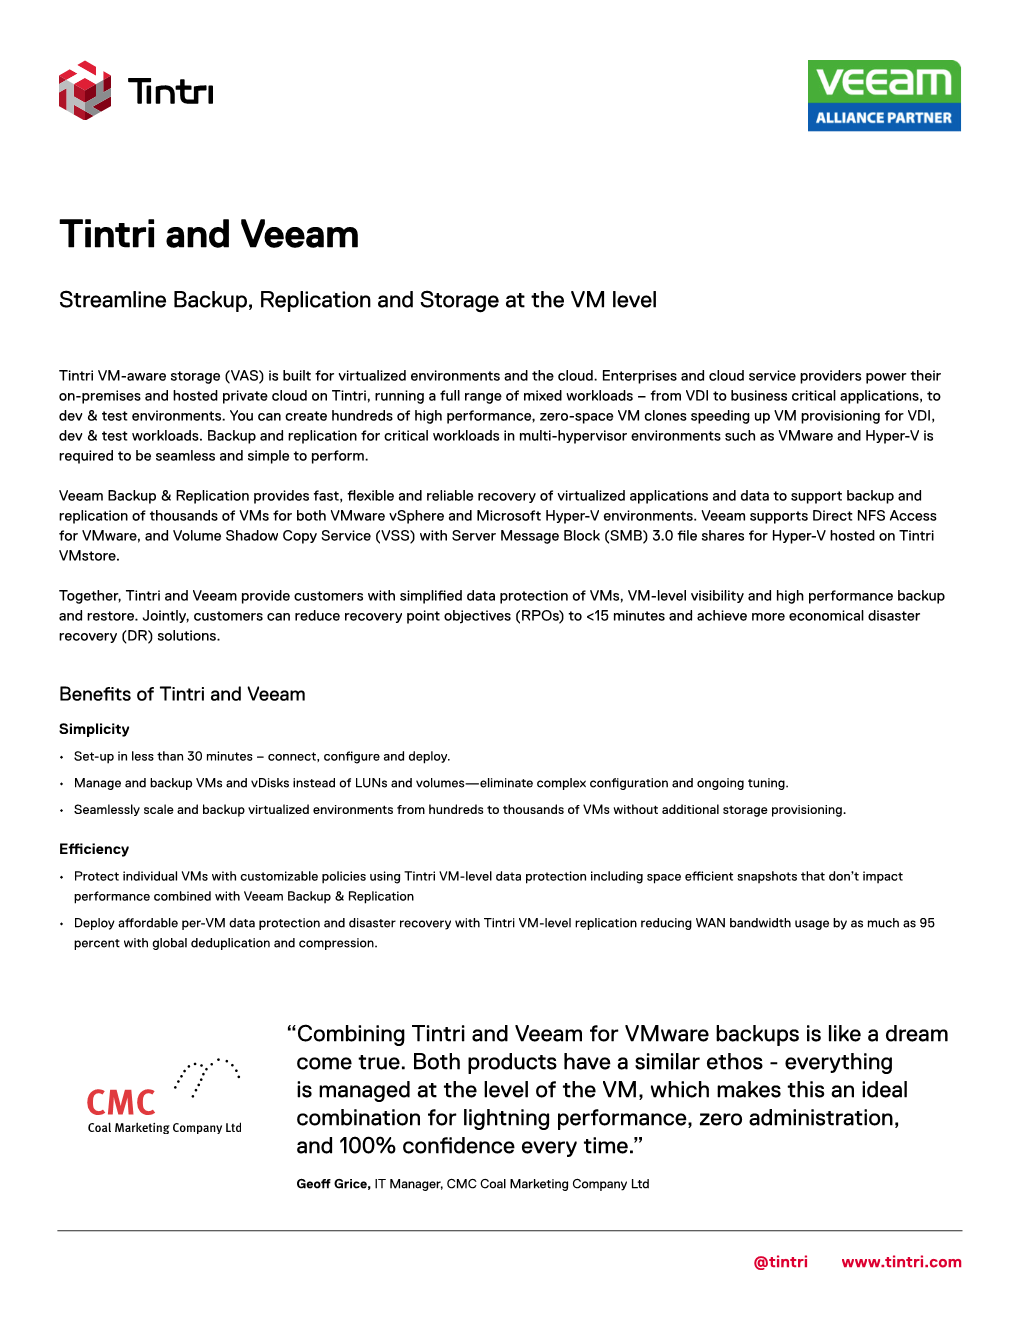 Tintri and Veeam at a Glance